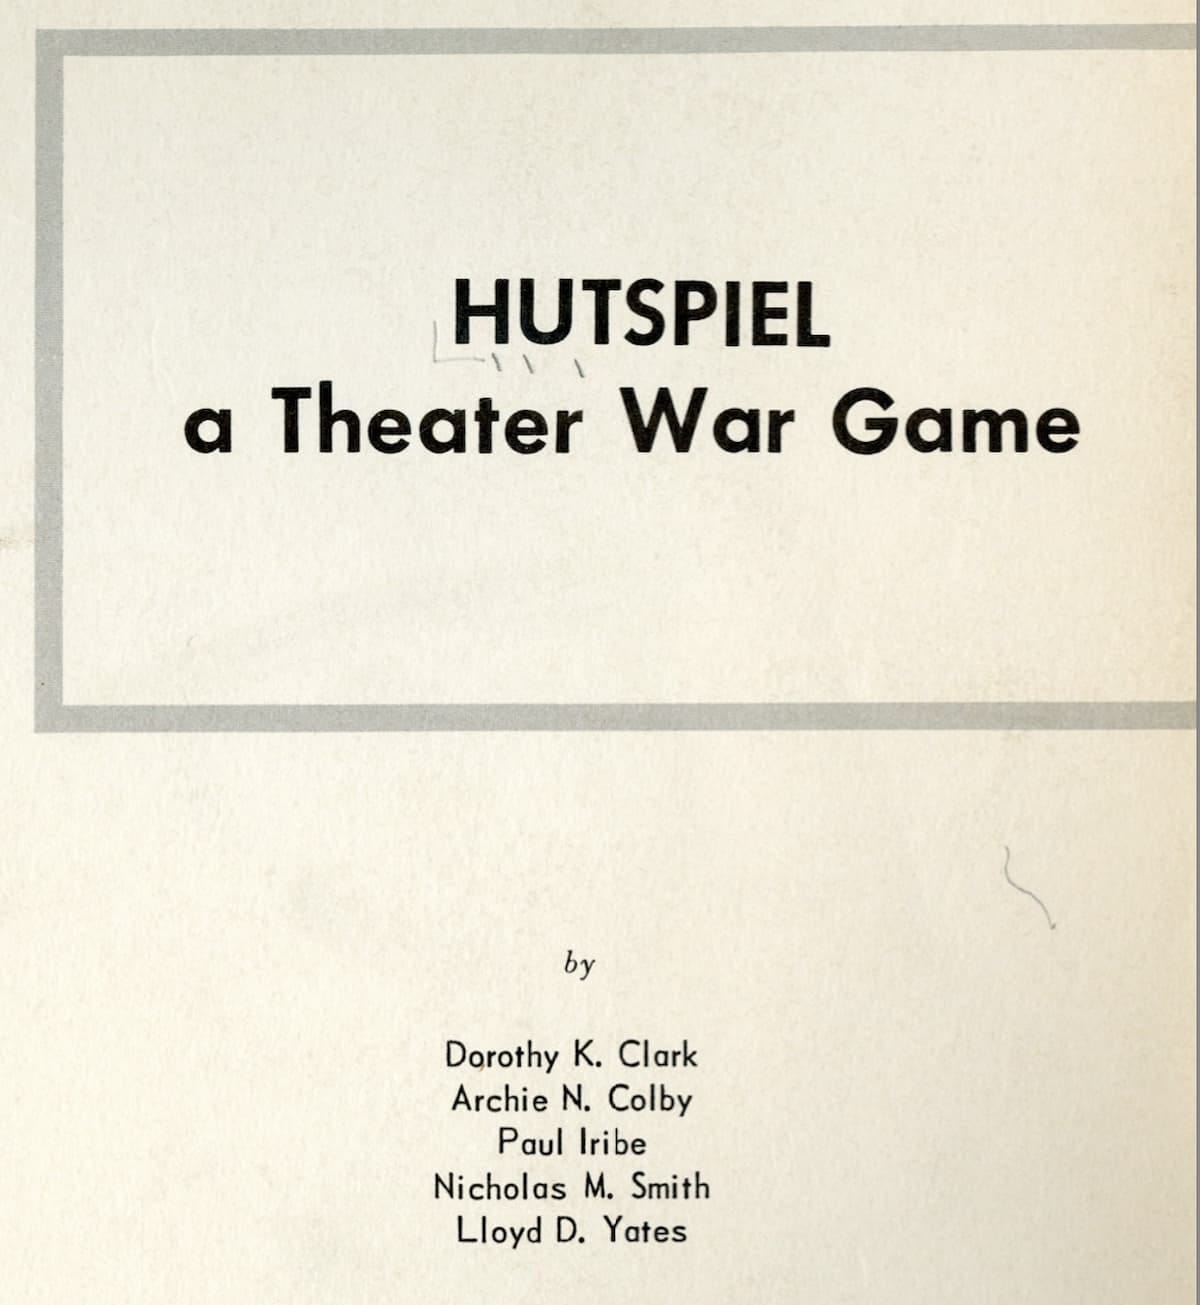 Scan of title page of report "HUTSPIEL: A Theater War Game," with "Dorothy K. Clark" as first author.